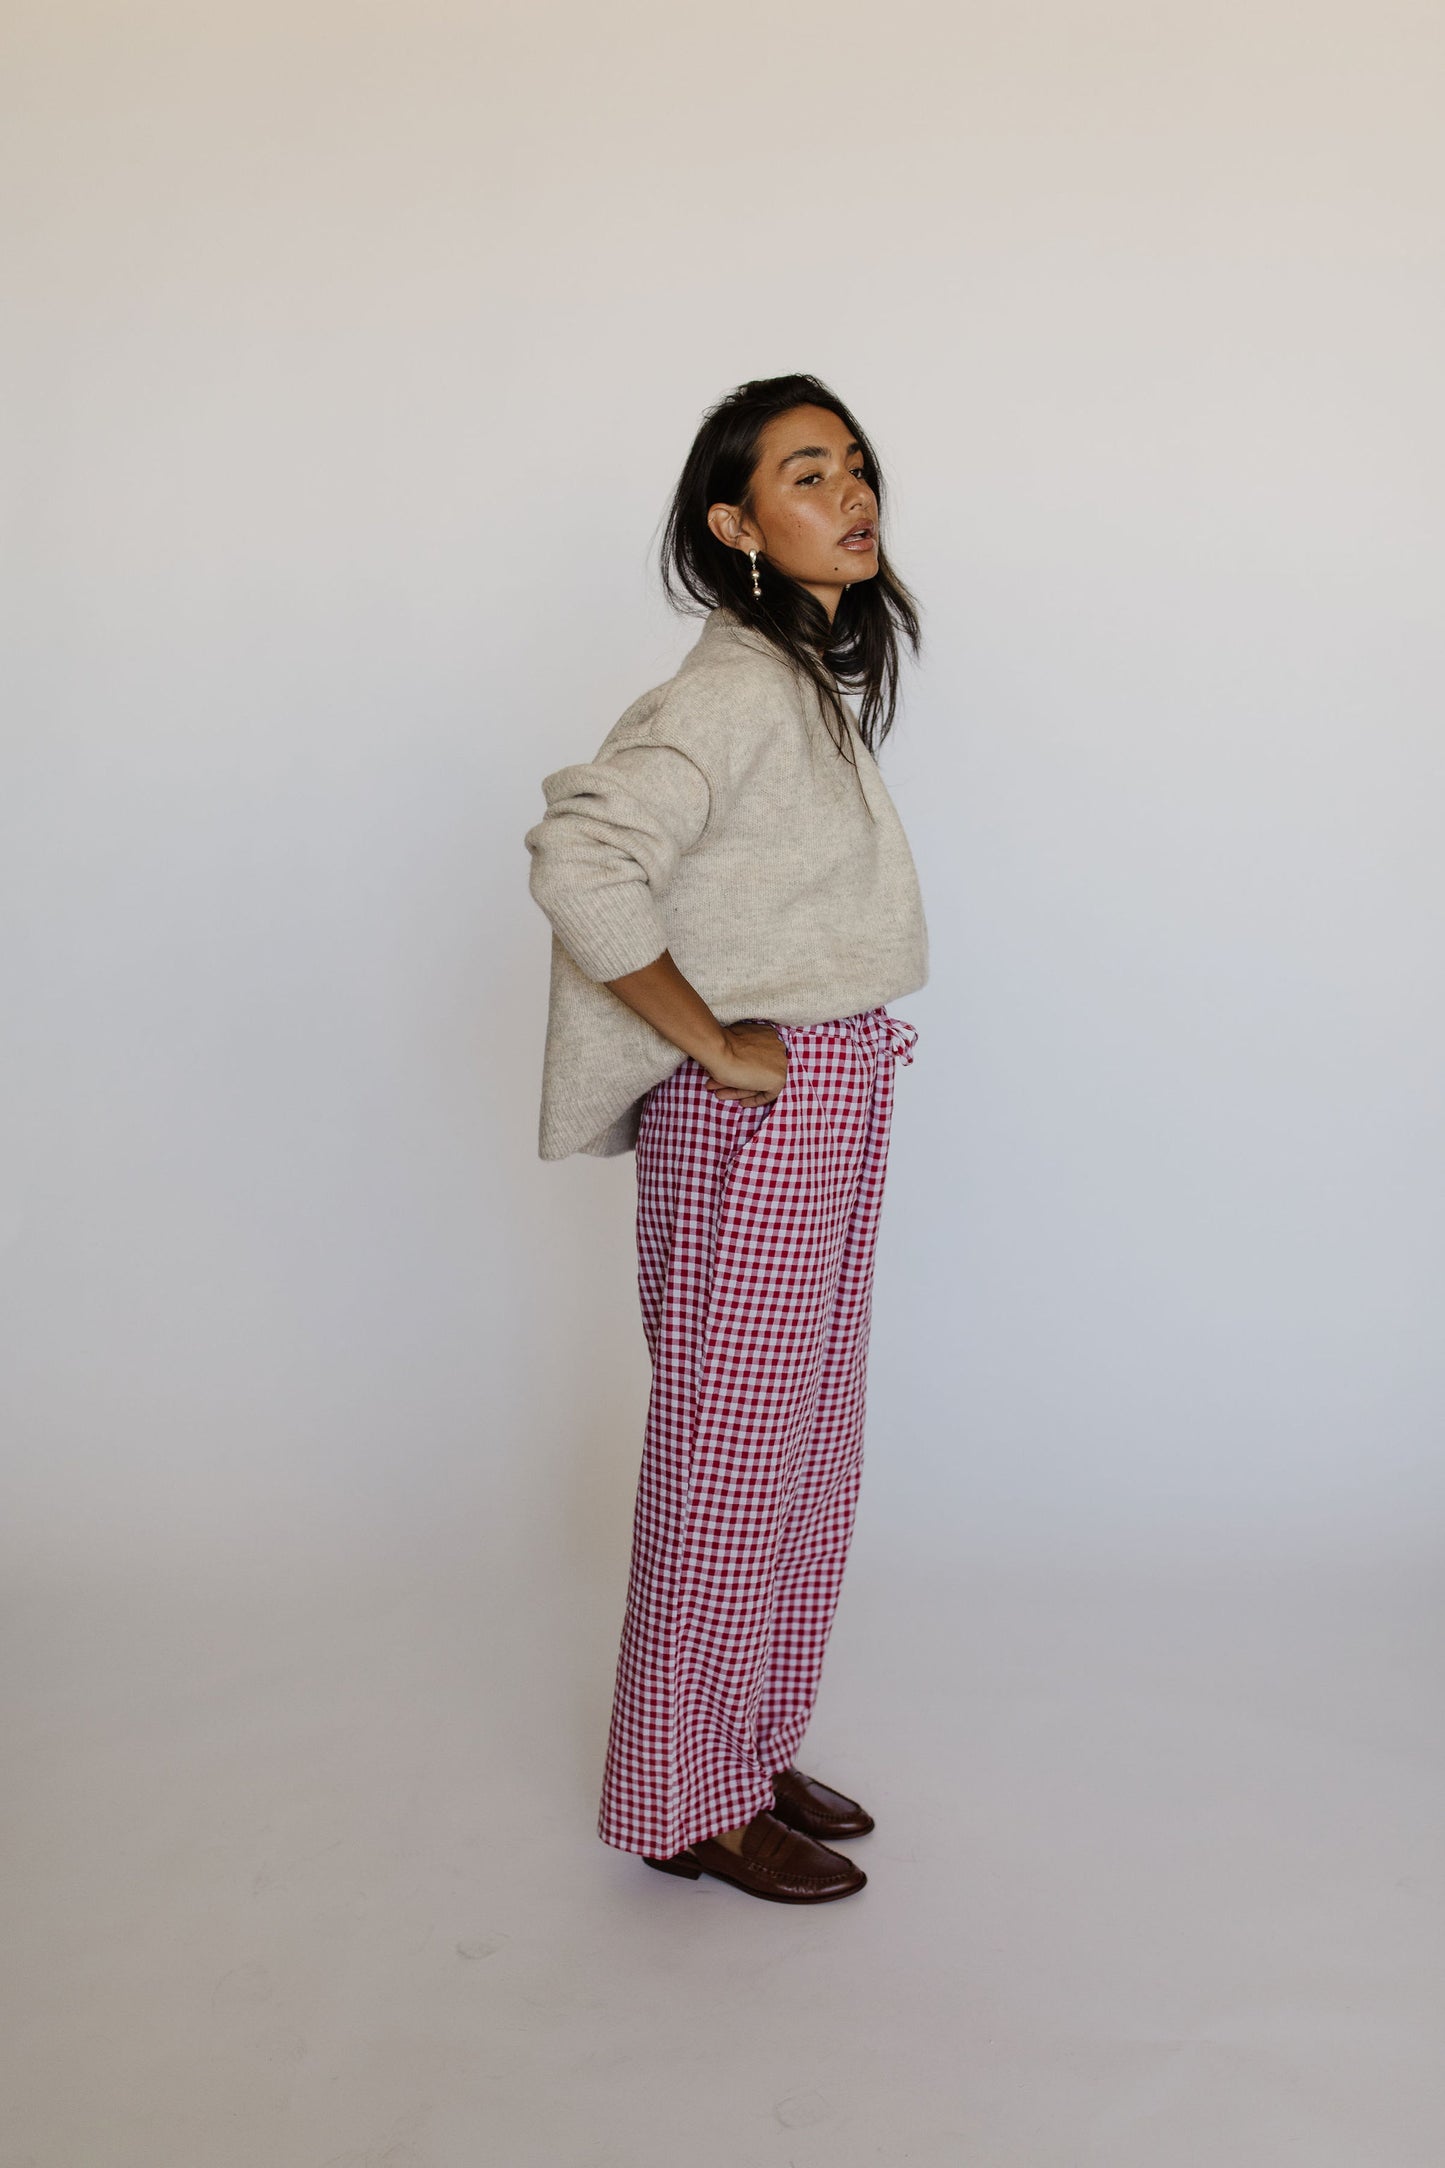 The Perfect Pants - Red Gingham